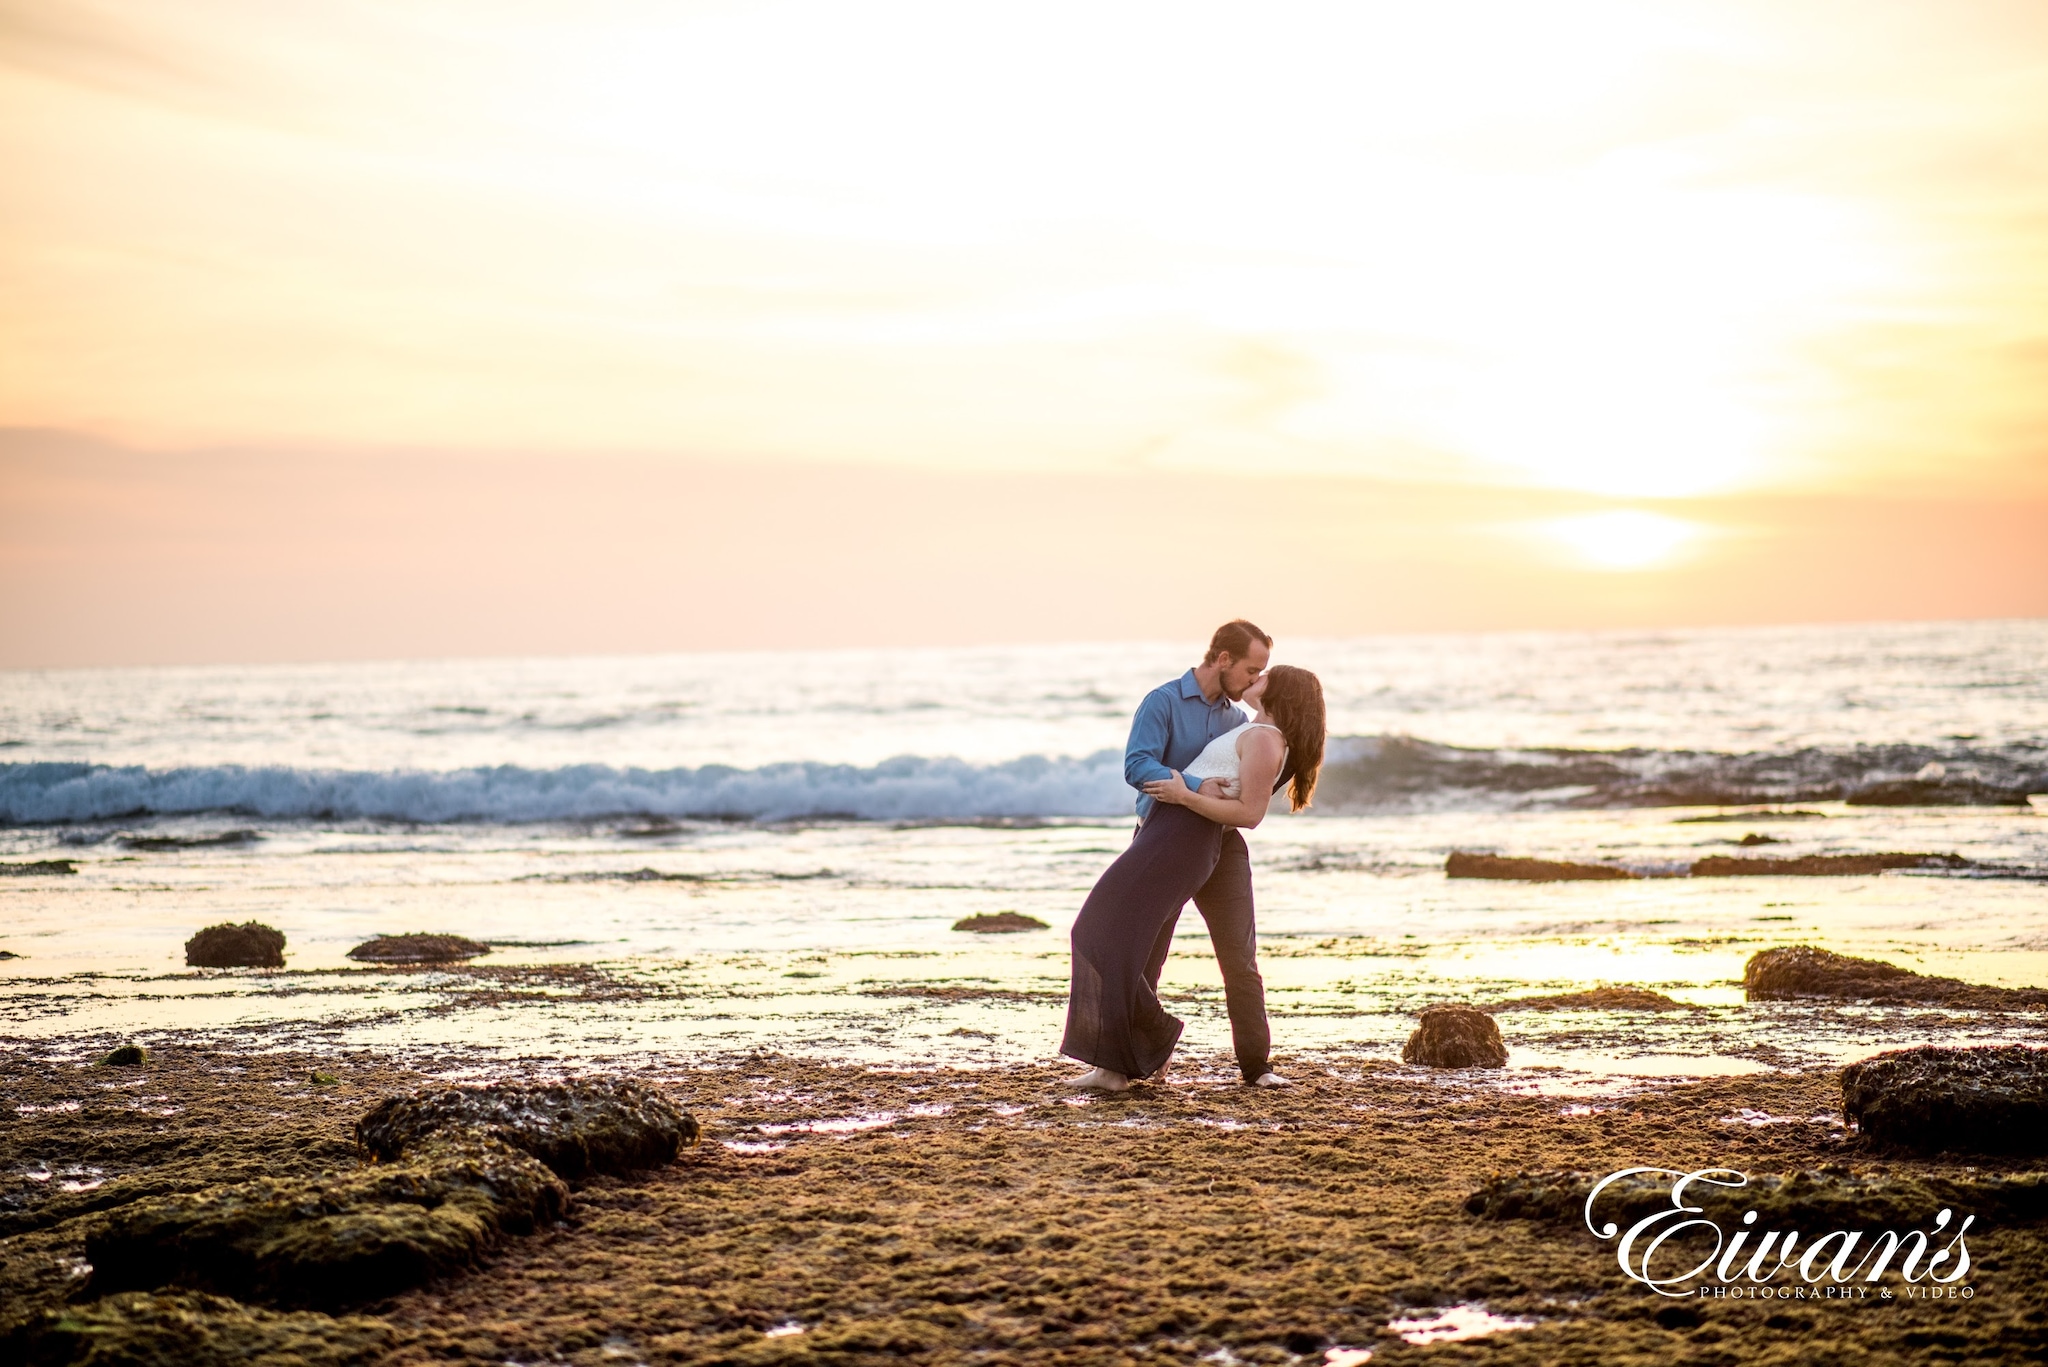 Engagement Photos At The Beach 003